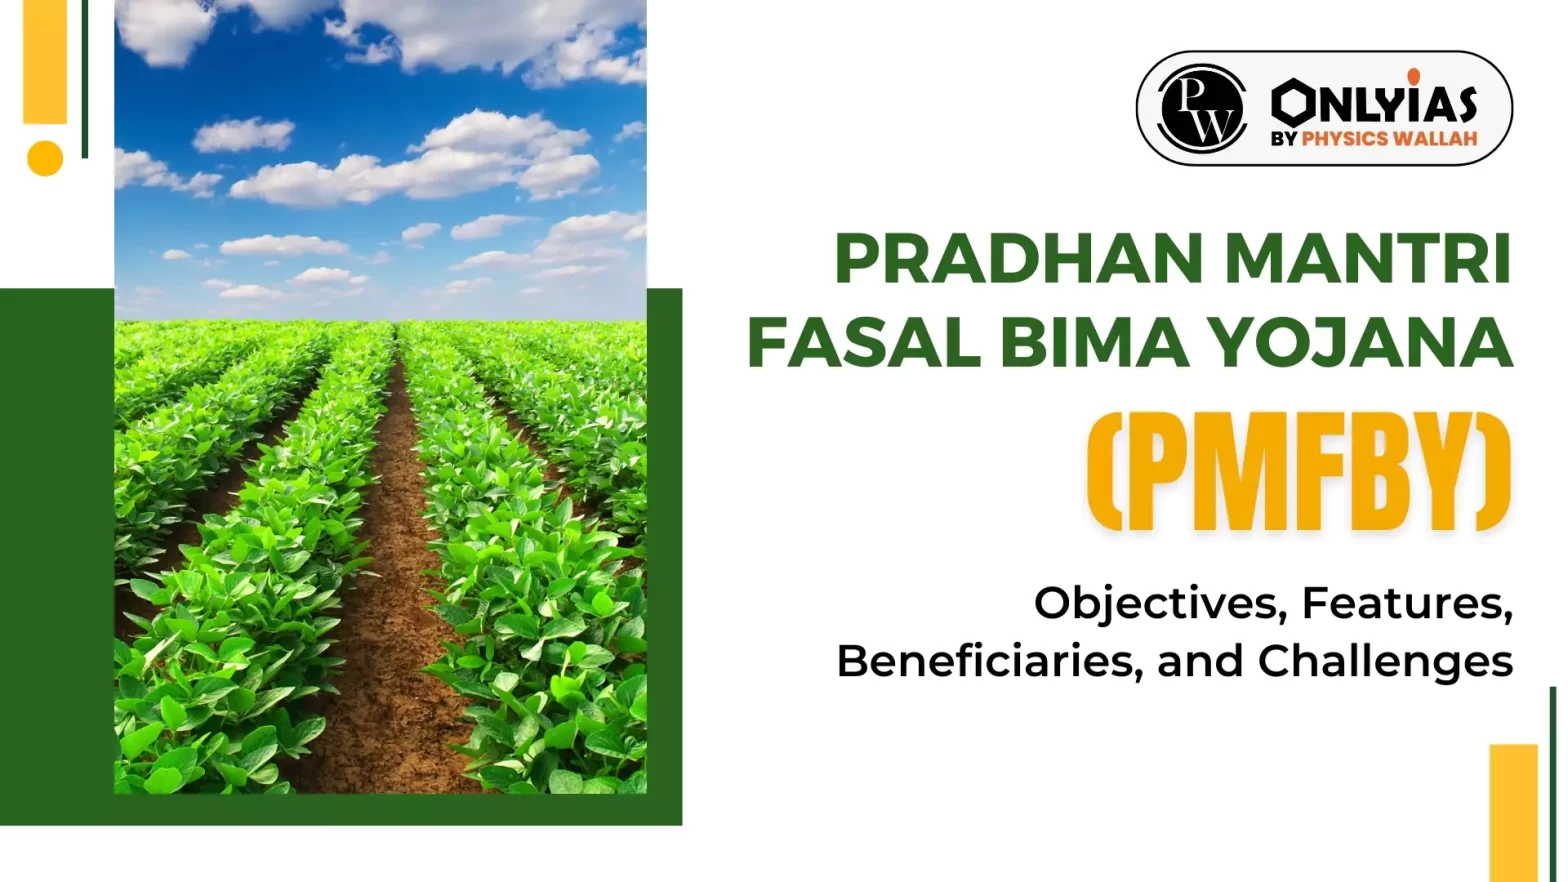 Pradhan Mantri Fasal Bima Yojana (PMFBY): Objectives, Features, Beneficiaries, and Challenges